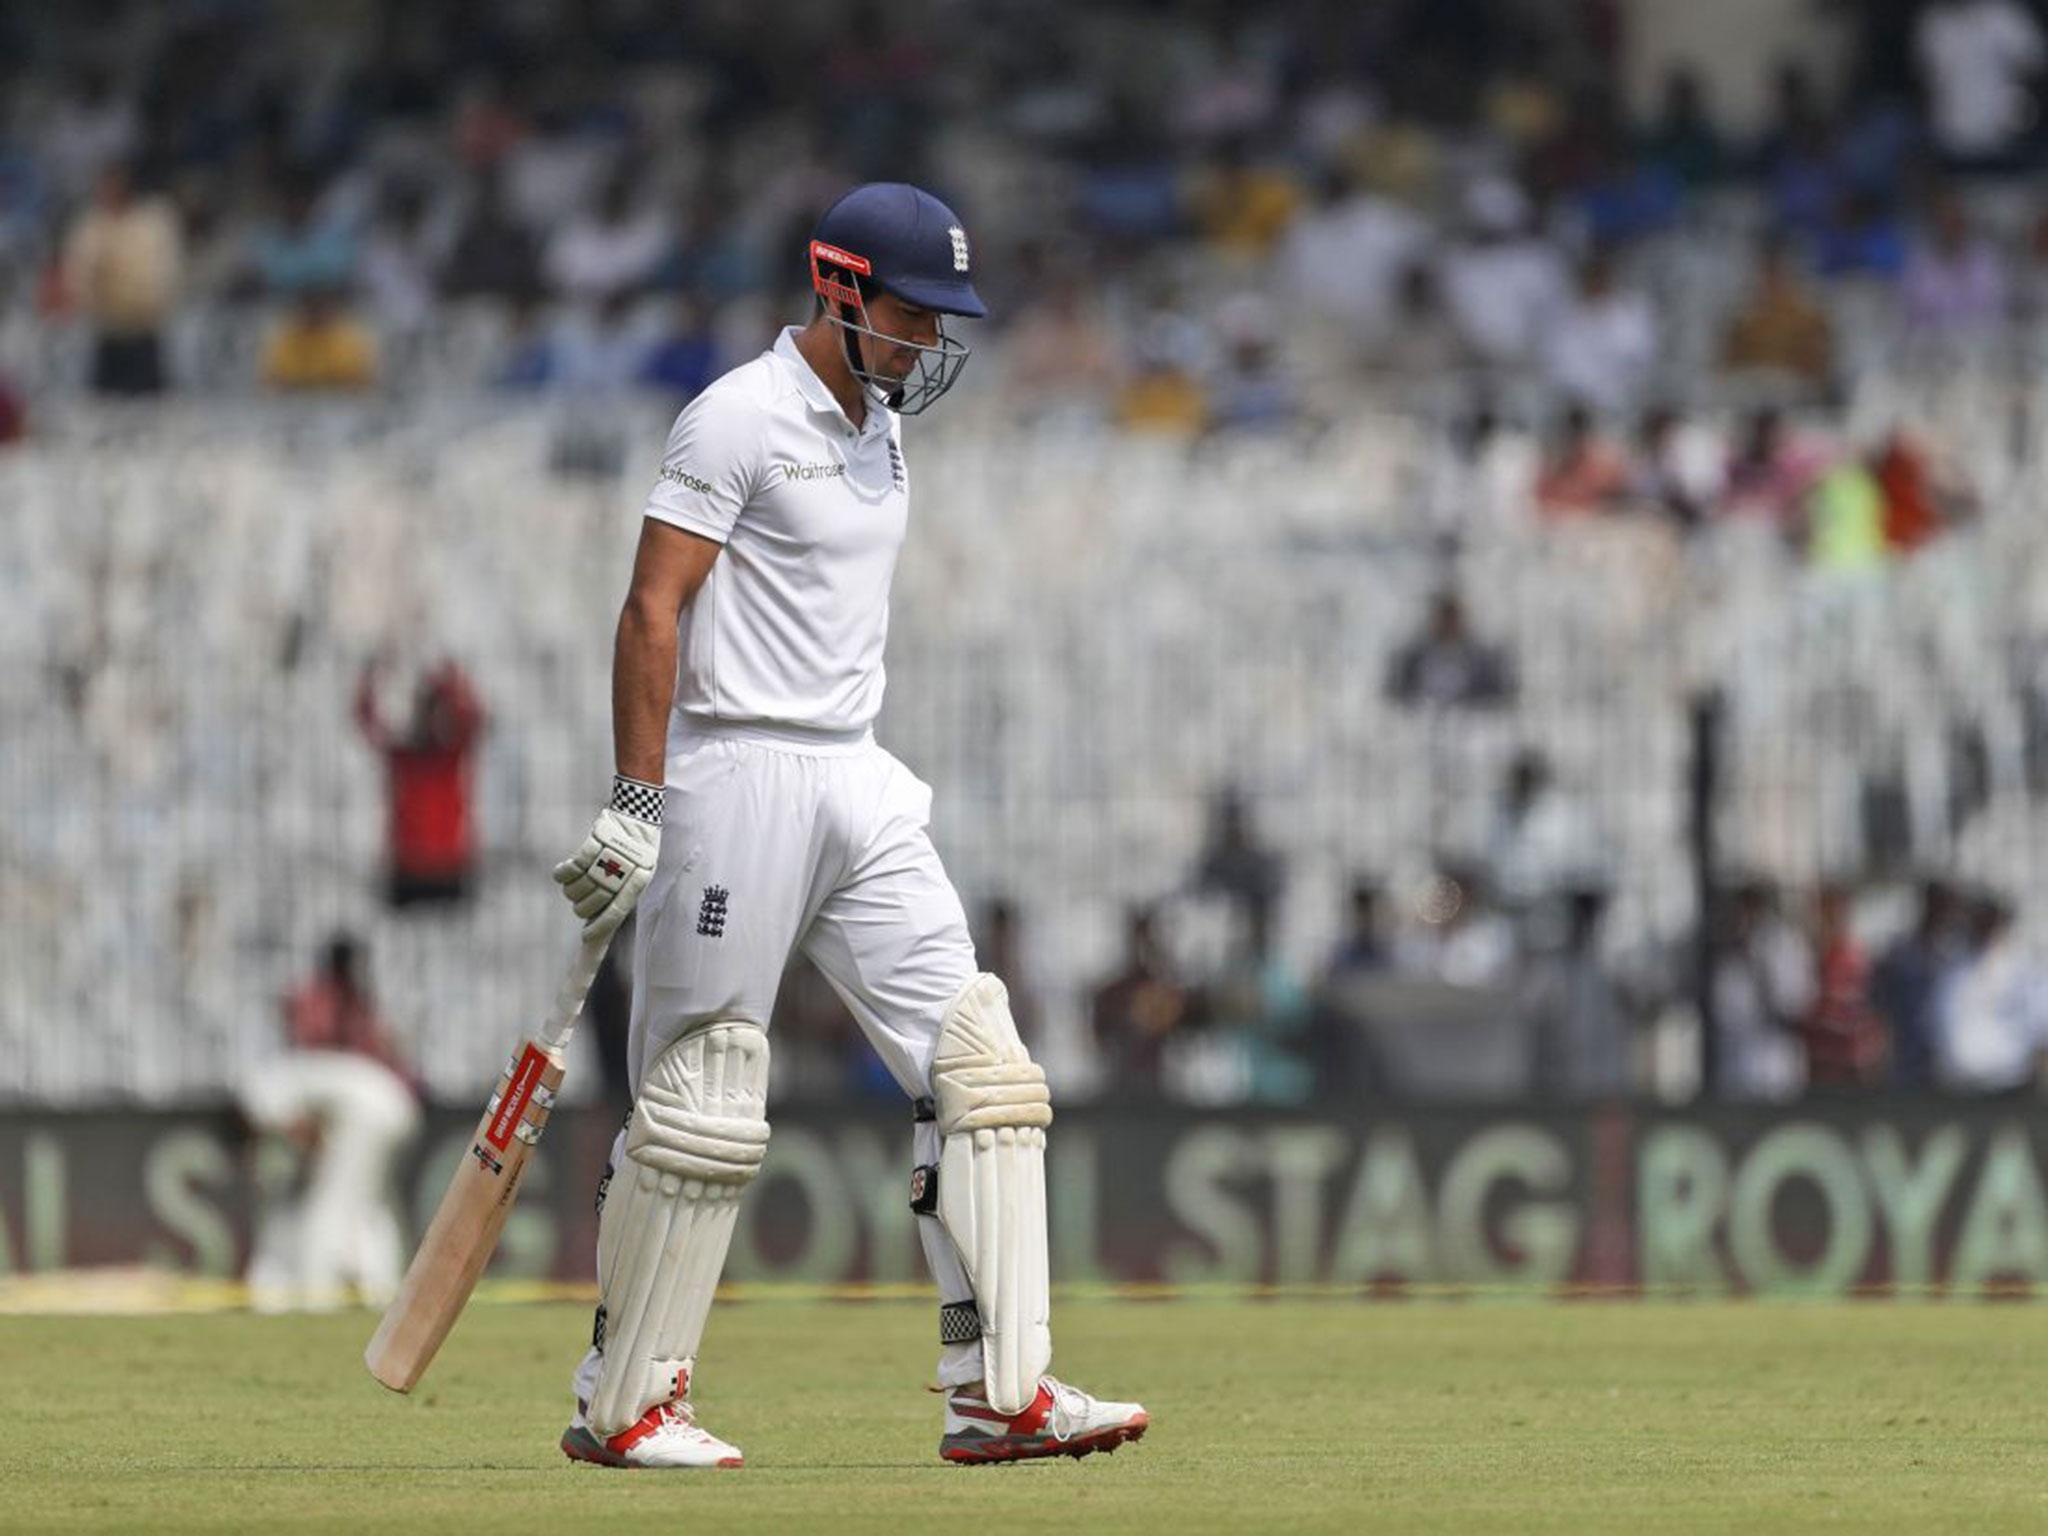 Alastair Cook walks off the field during England's second innings in the fifth Test defeat by India